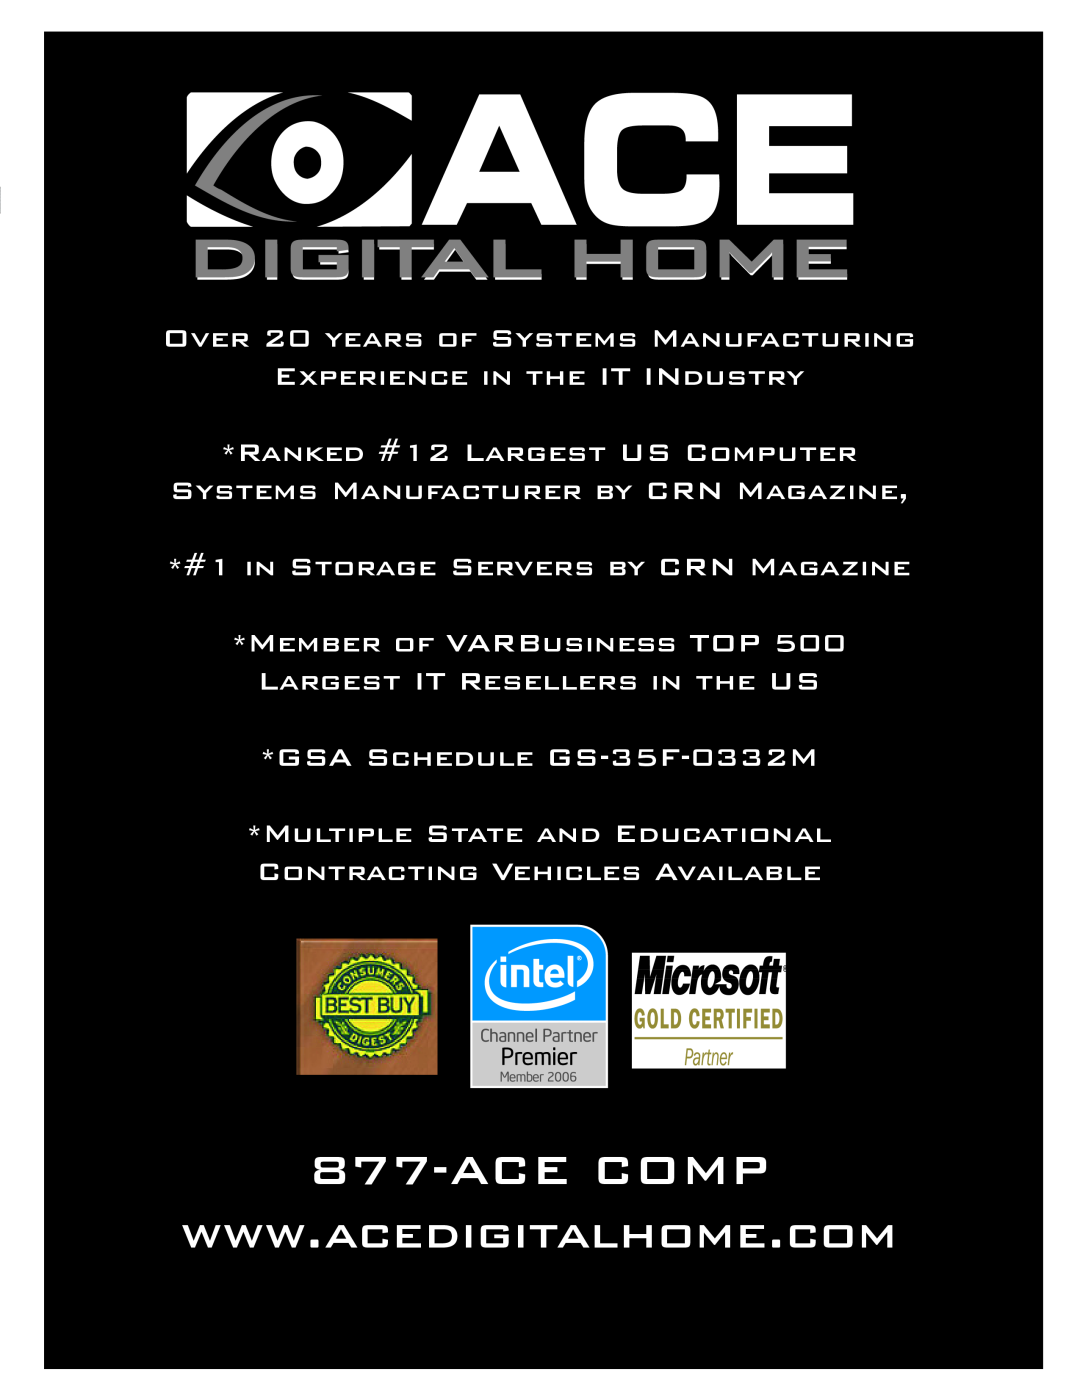 Ace LHD LIMITED II specifications Ace Comp, OVER 20 YEARS OF SYSTEMS MANUFACTURING EXPERIENCE IN THE IT INDUSTRY, Member 